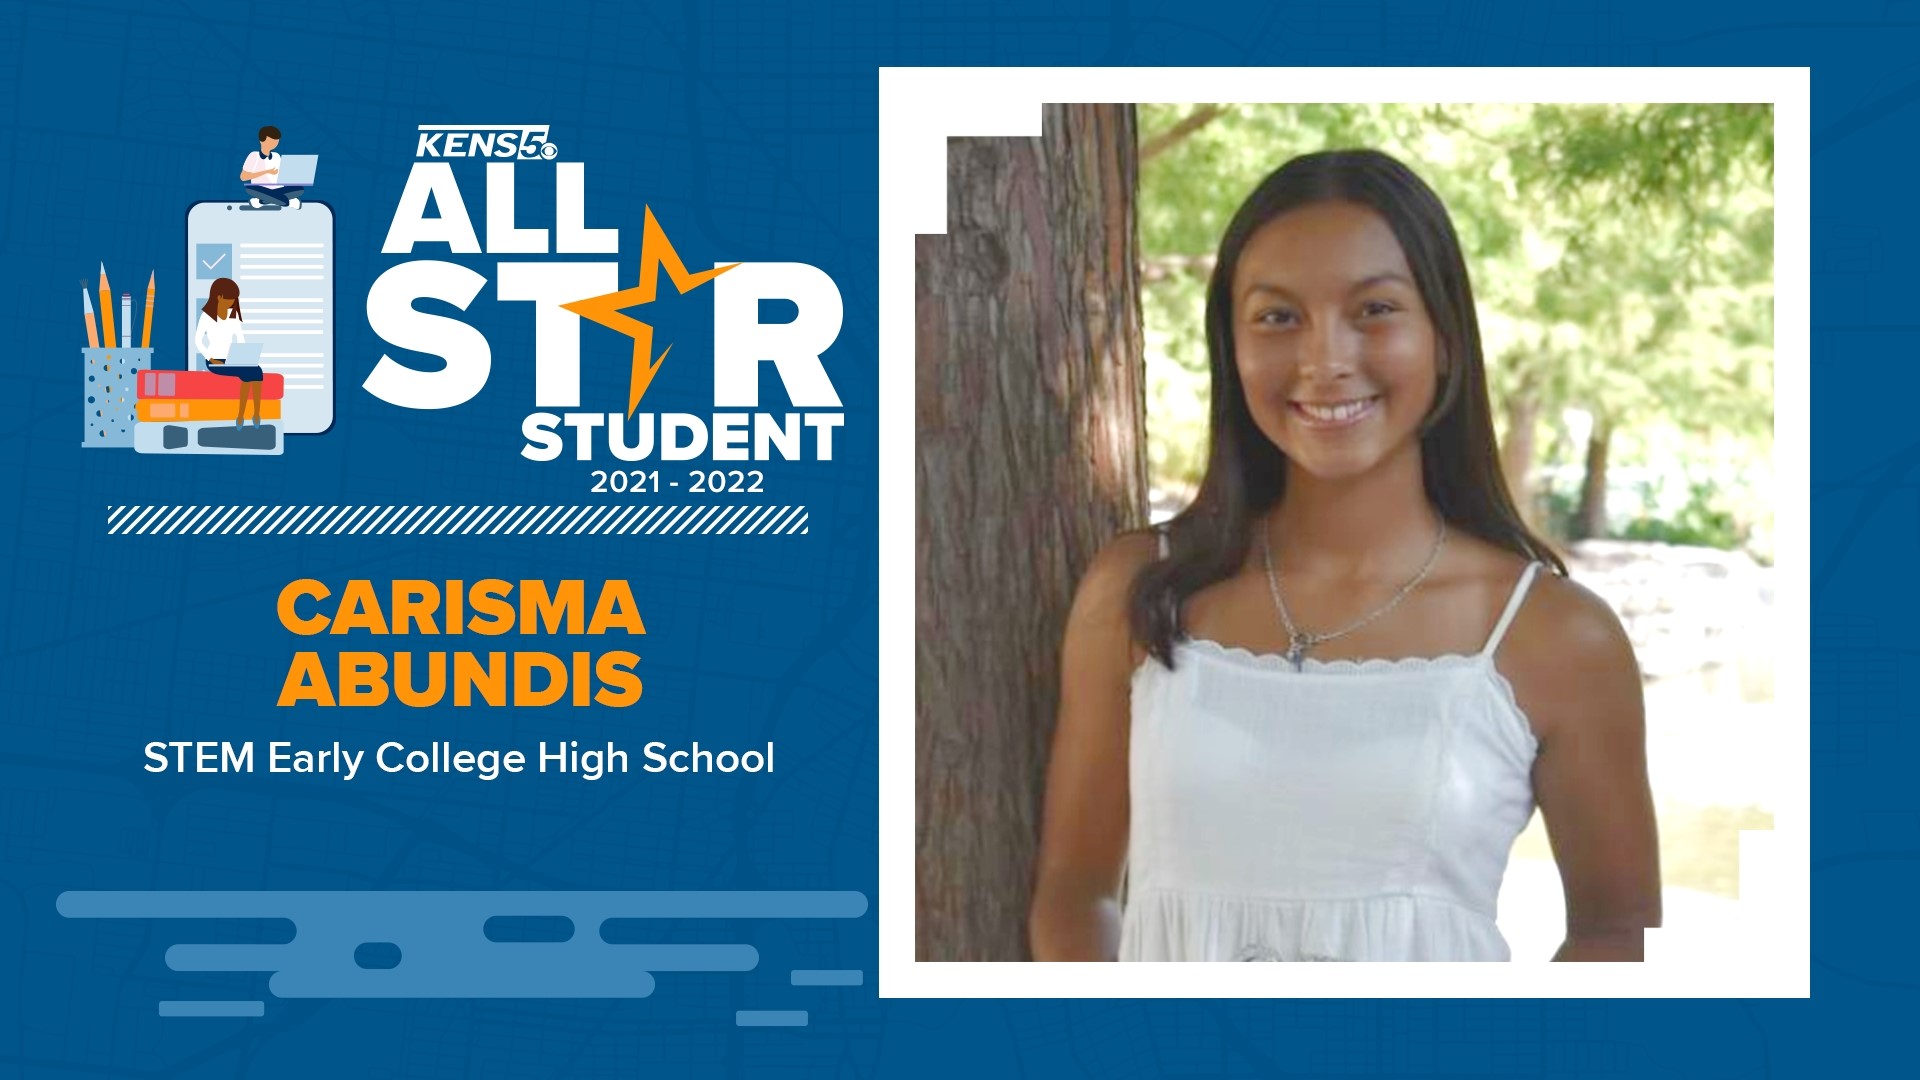 Carisma Abundis is a KENS 5 All-Star Student.